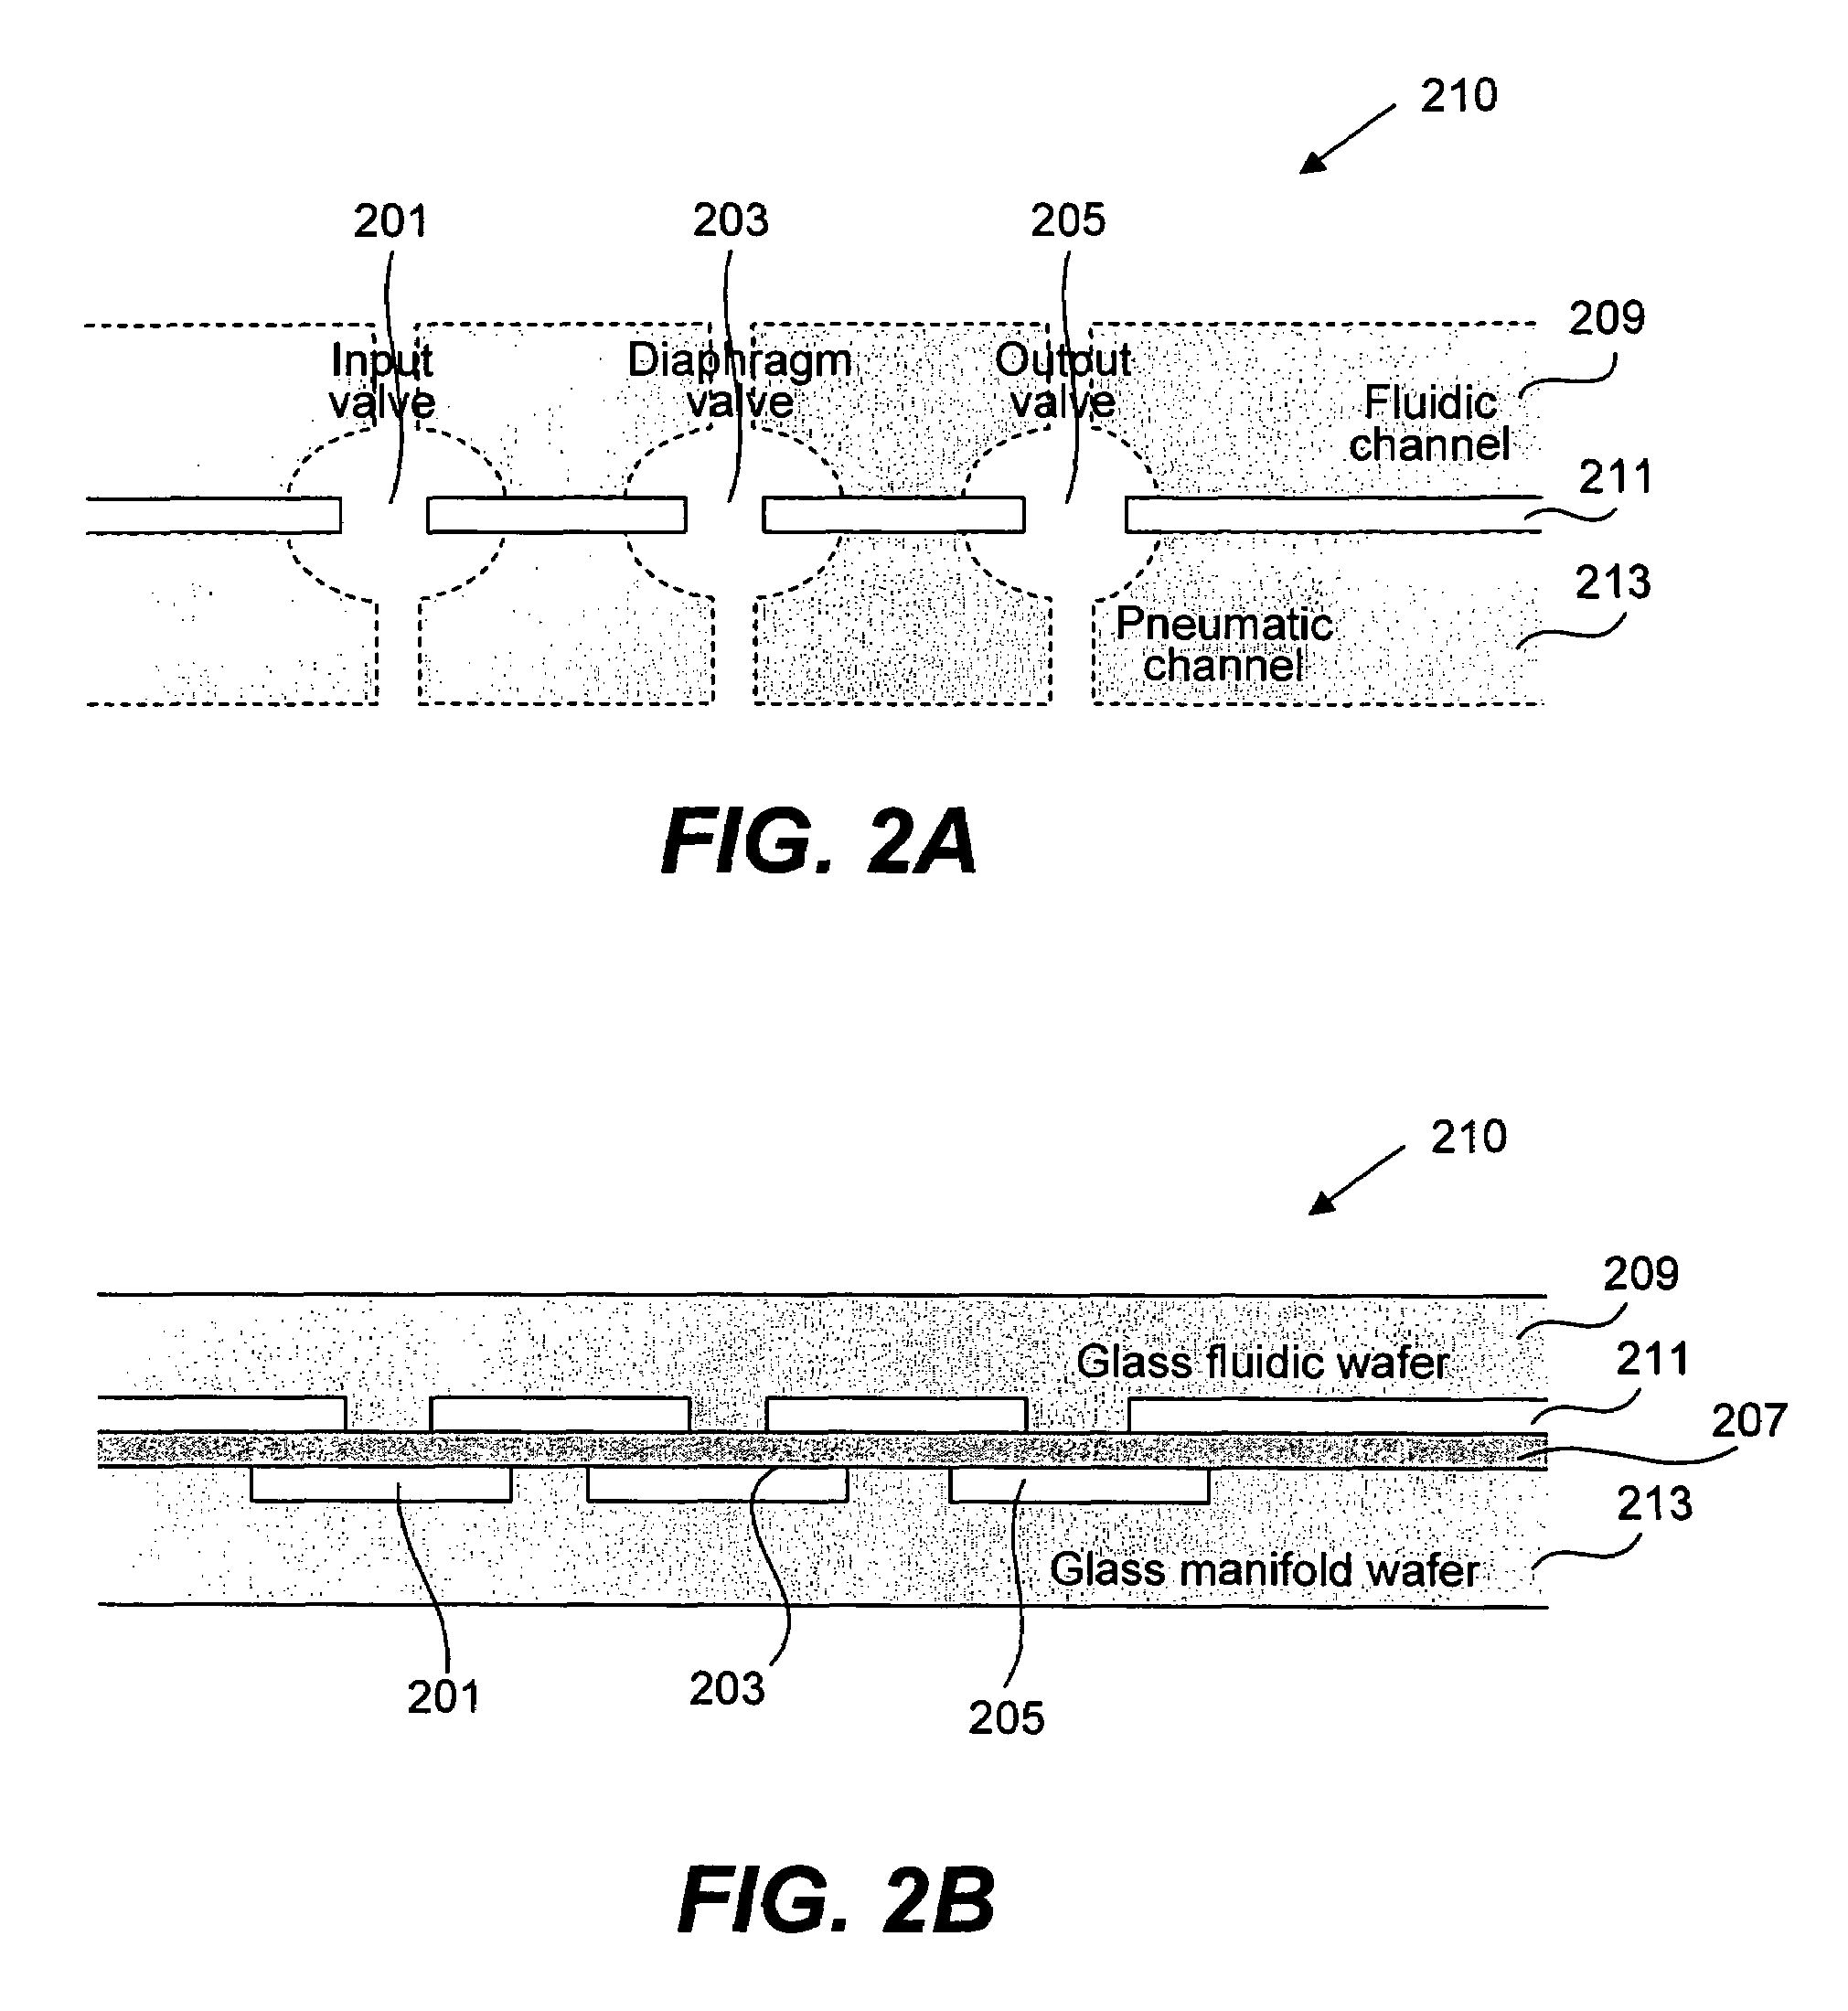 Fluid control structures in microfluidic devices